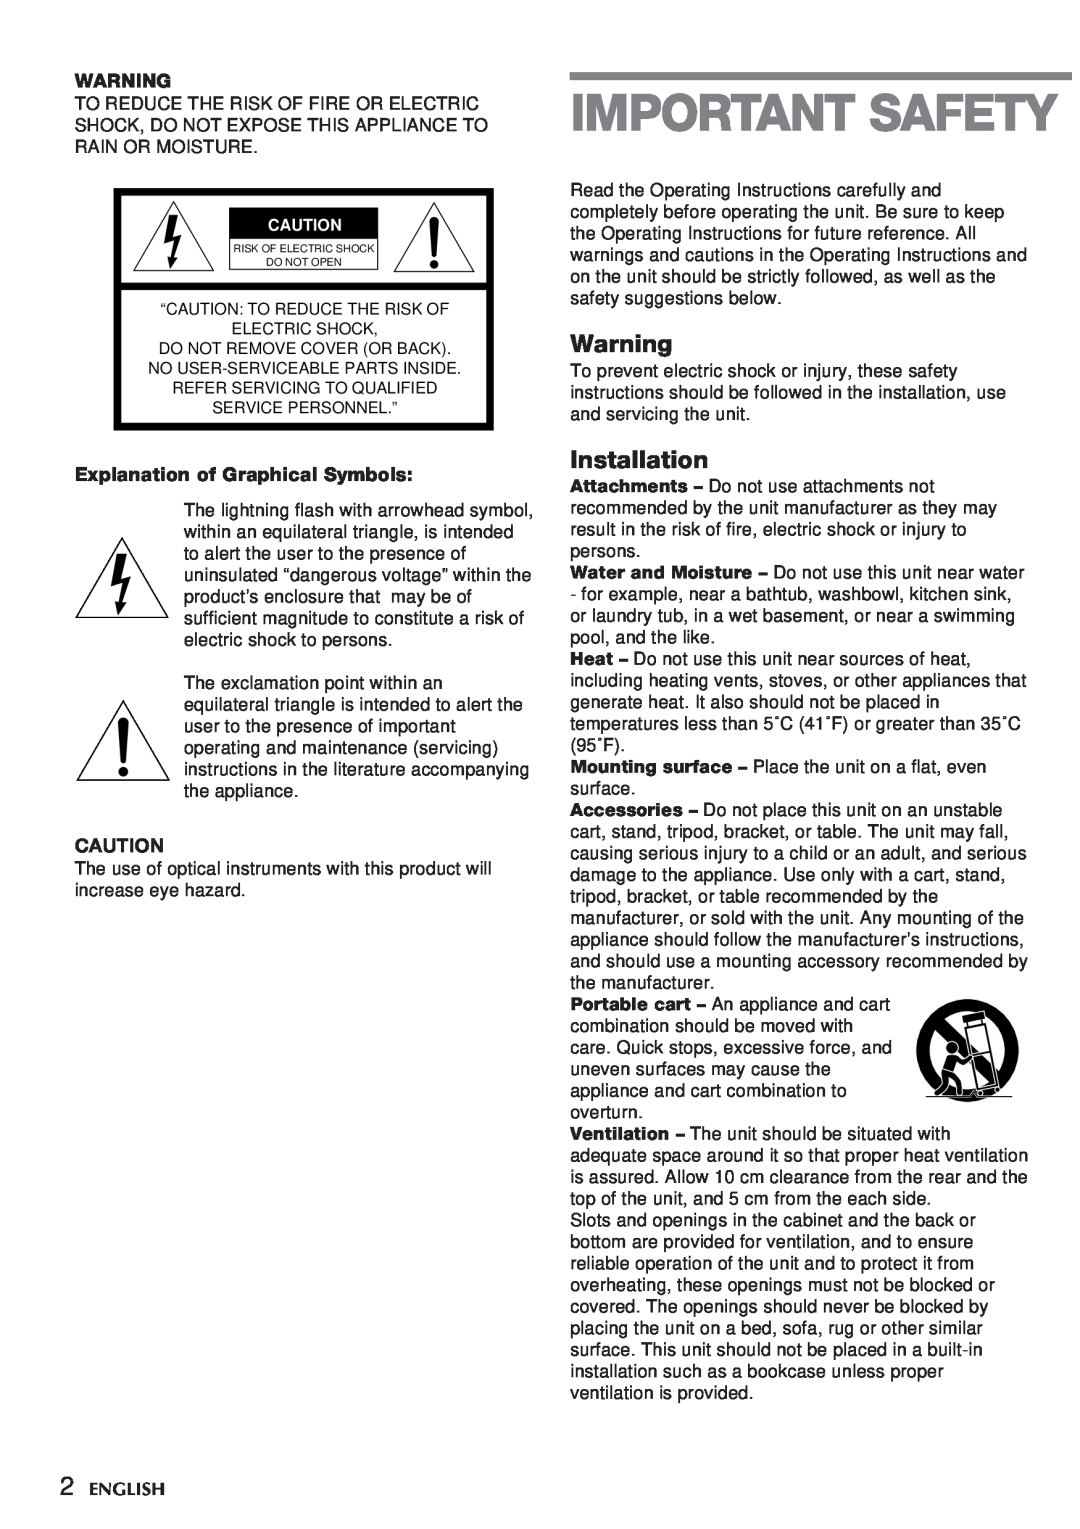 Aiwa CSD-TD59, CSD-TD55 manual Installation, Explanation of Graphical Symbols, Important Safety 